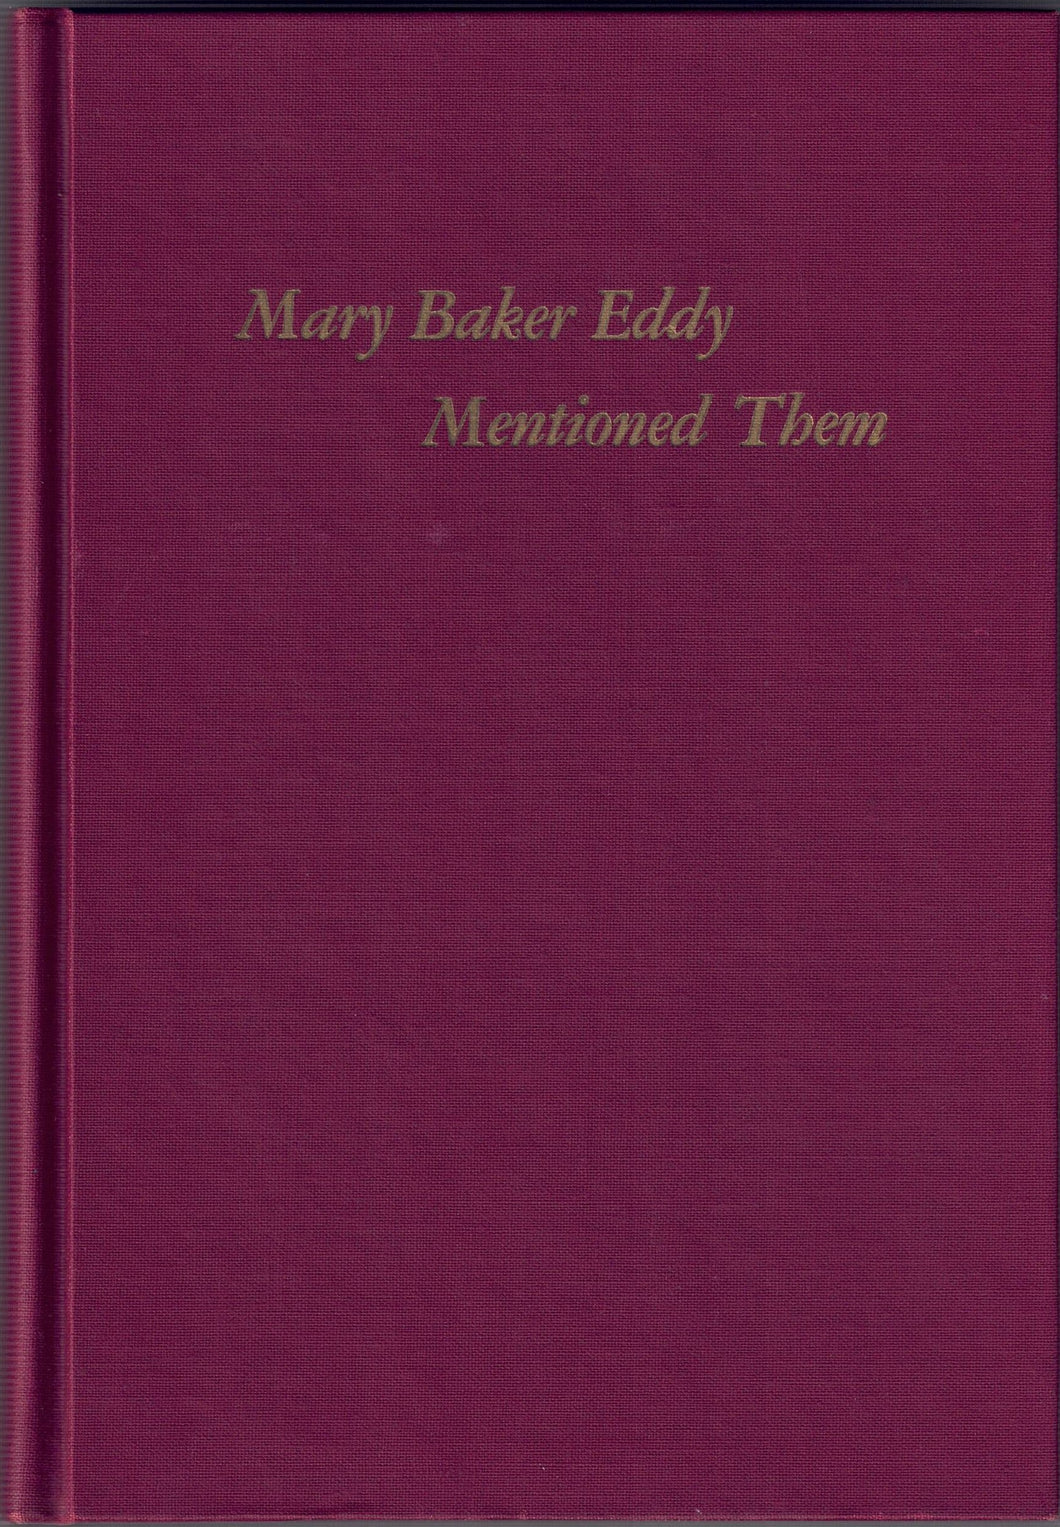 Mary Baker Eddy Mentioned Them